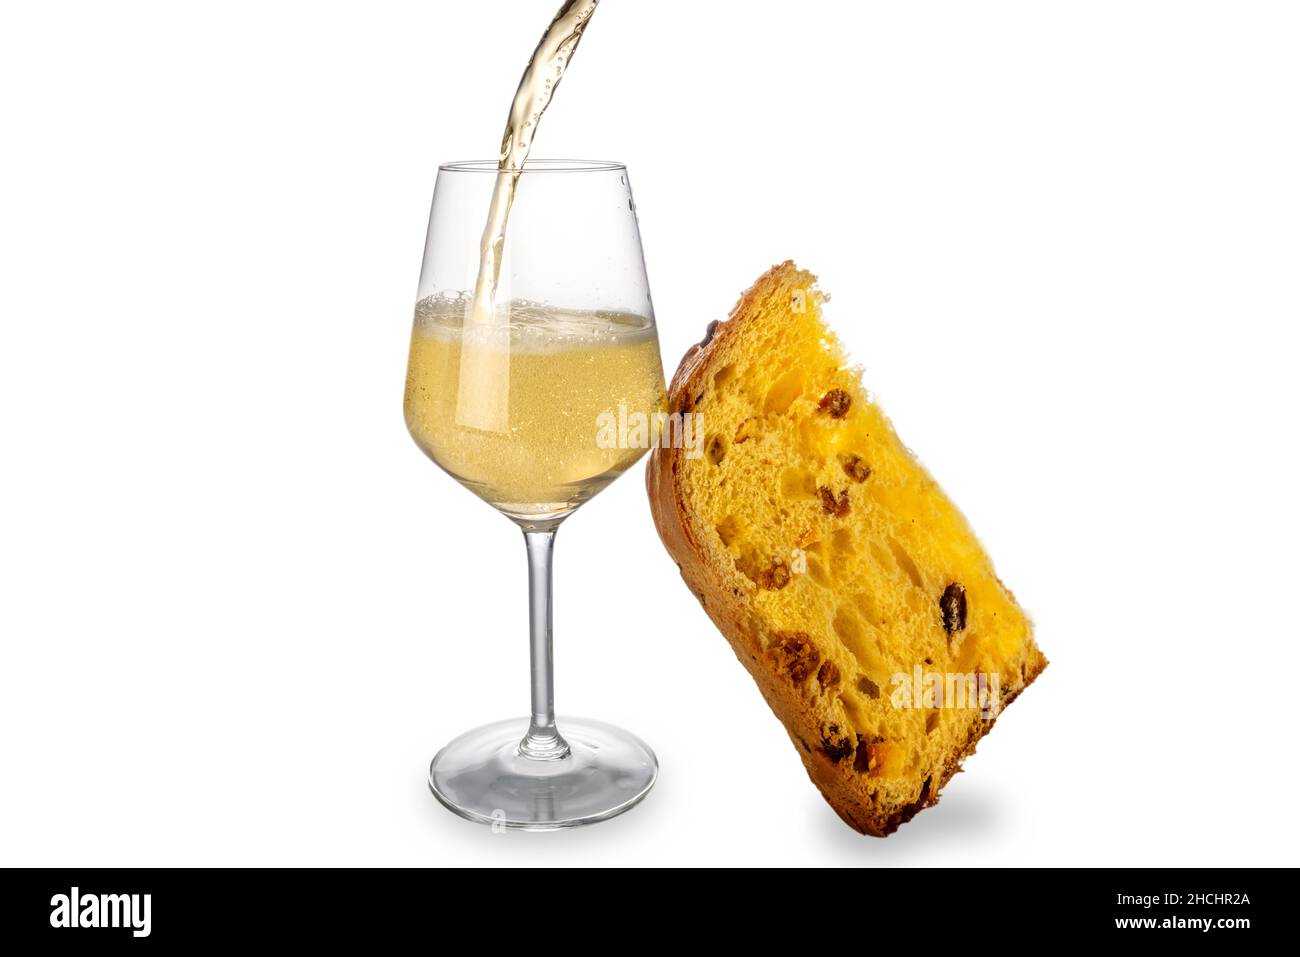 Champagne or sparkling wine splashing into glass with slice of panettone cake, isolated on white. Christmas, New Year celebrations concept. Copy space Stock Photo